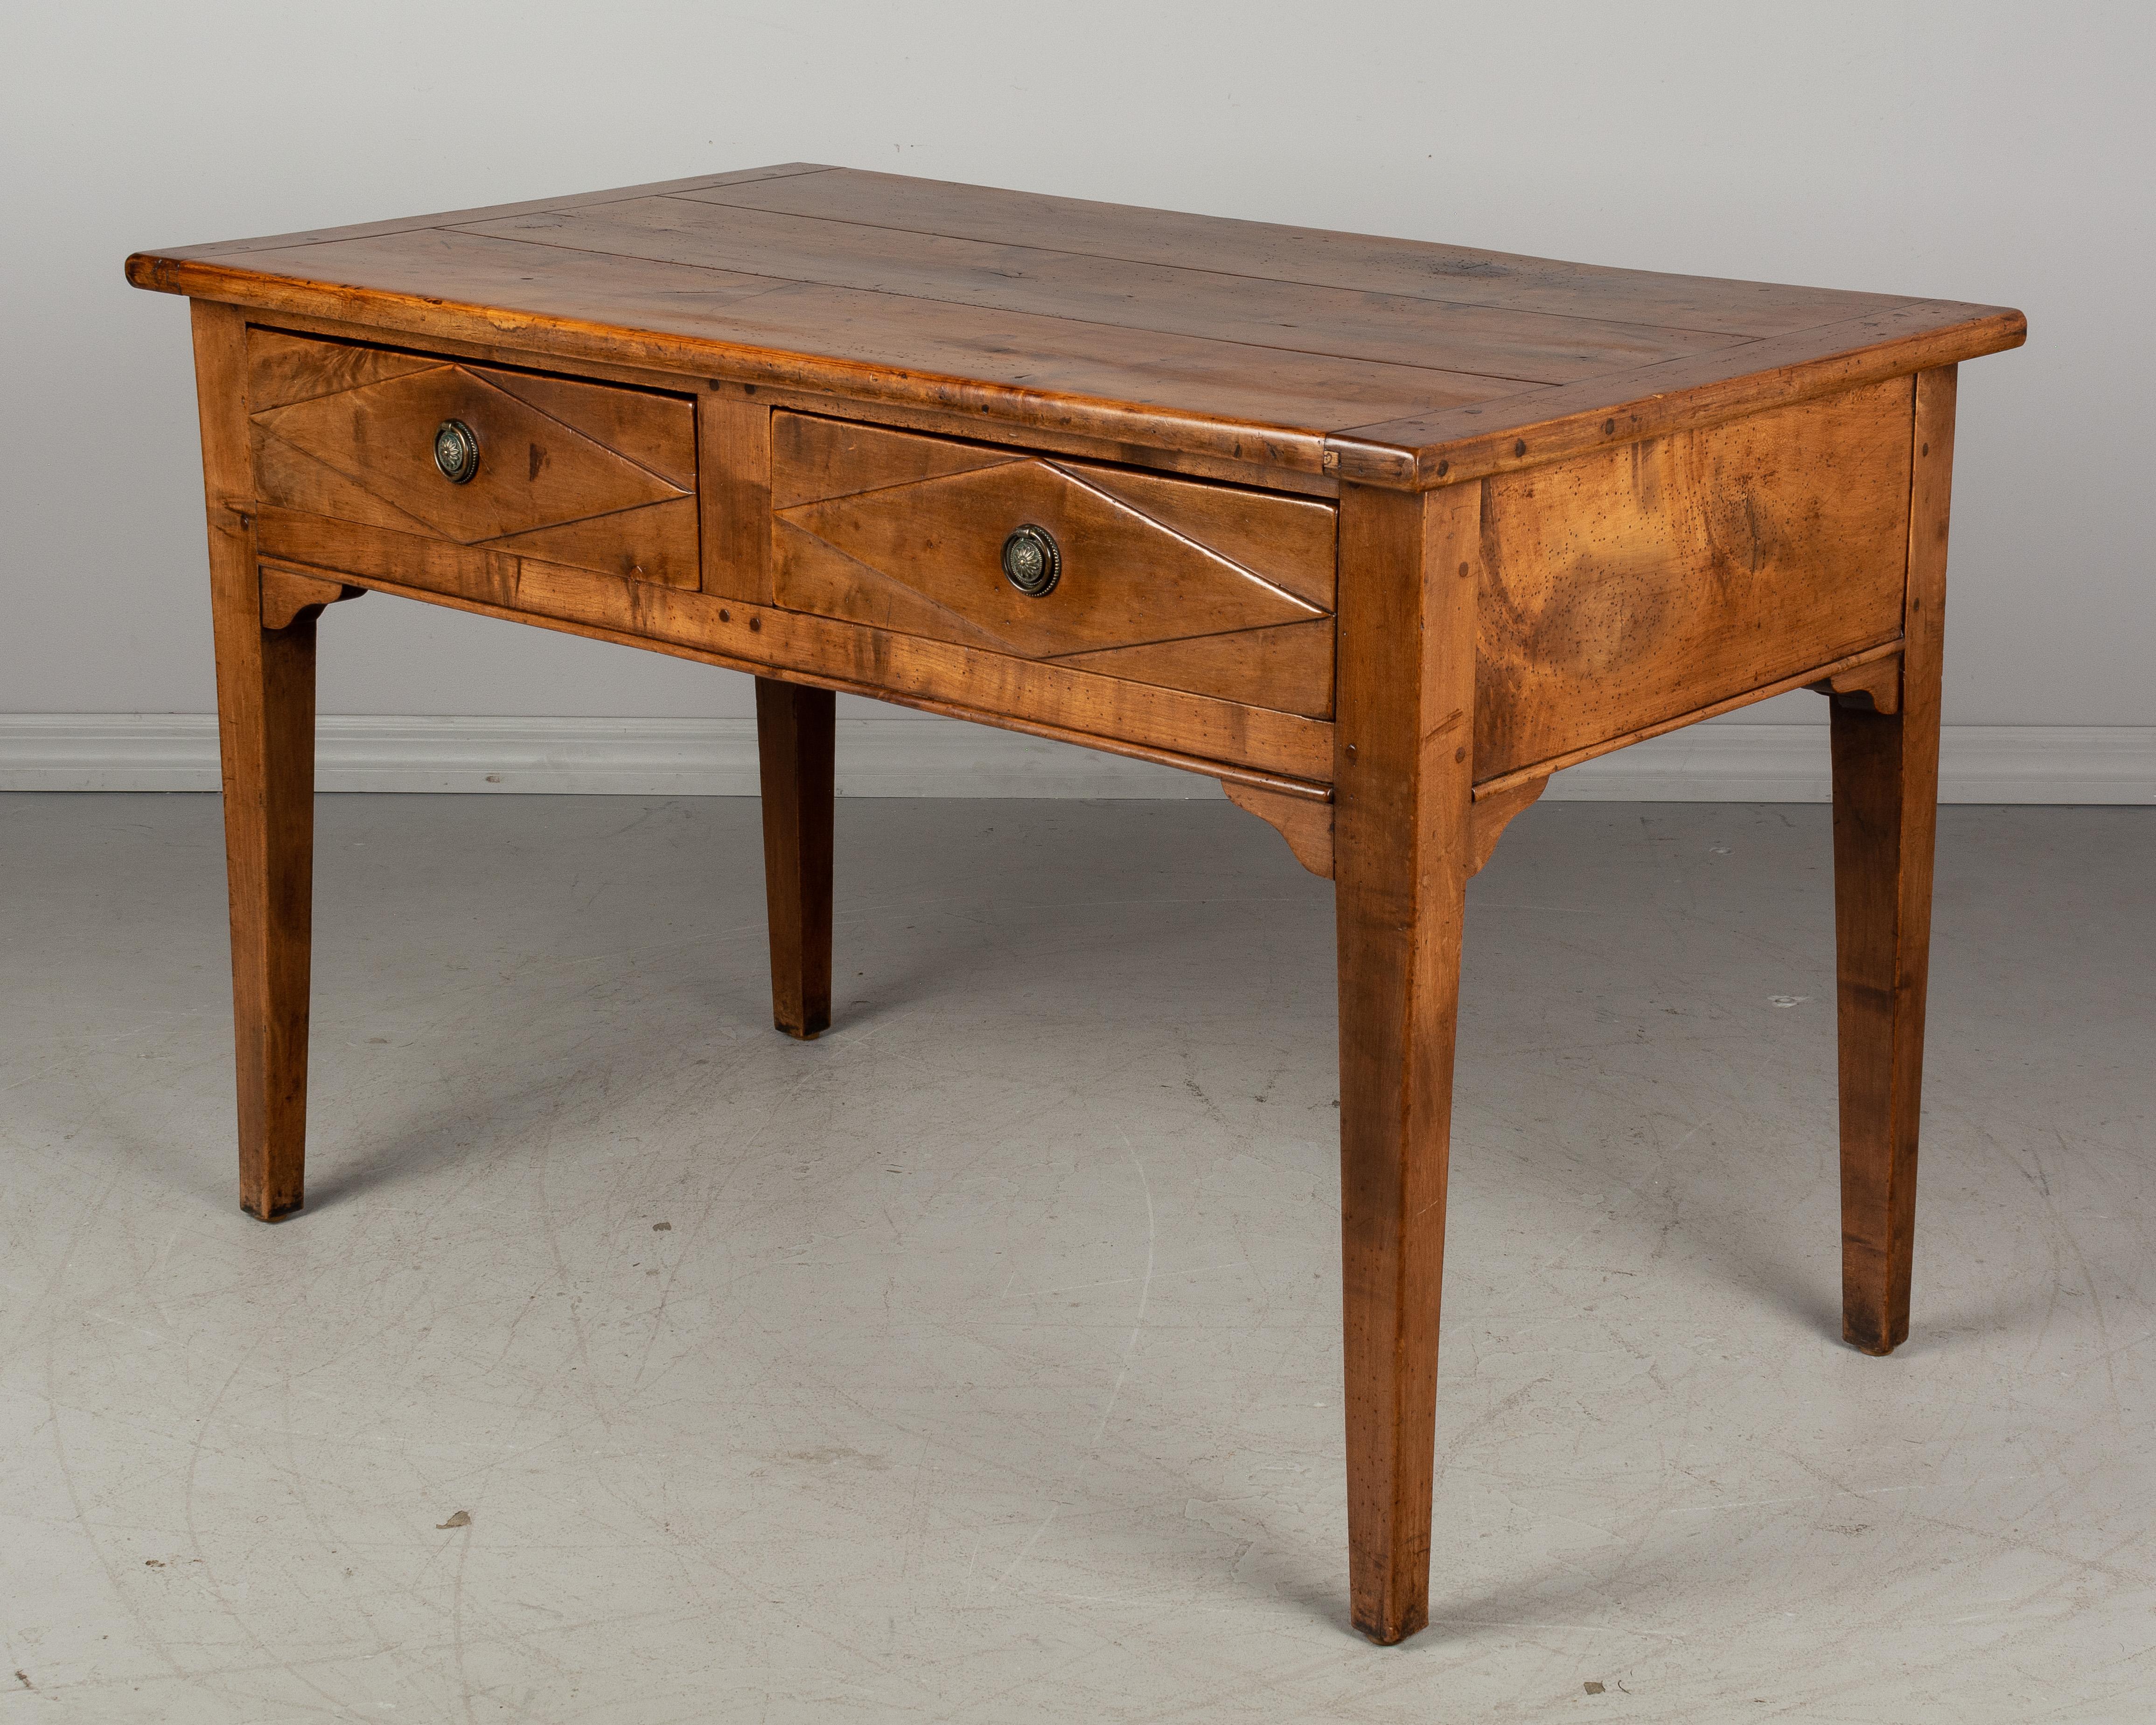 A 19th century Country French walnut farm table with two large, deep dovetailed drawers. Original brass ring pulls. A good solid table, well-crafted of thick wood planks using pegged construction. May be used as a console or center table. Clearance